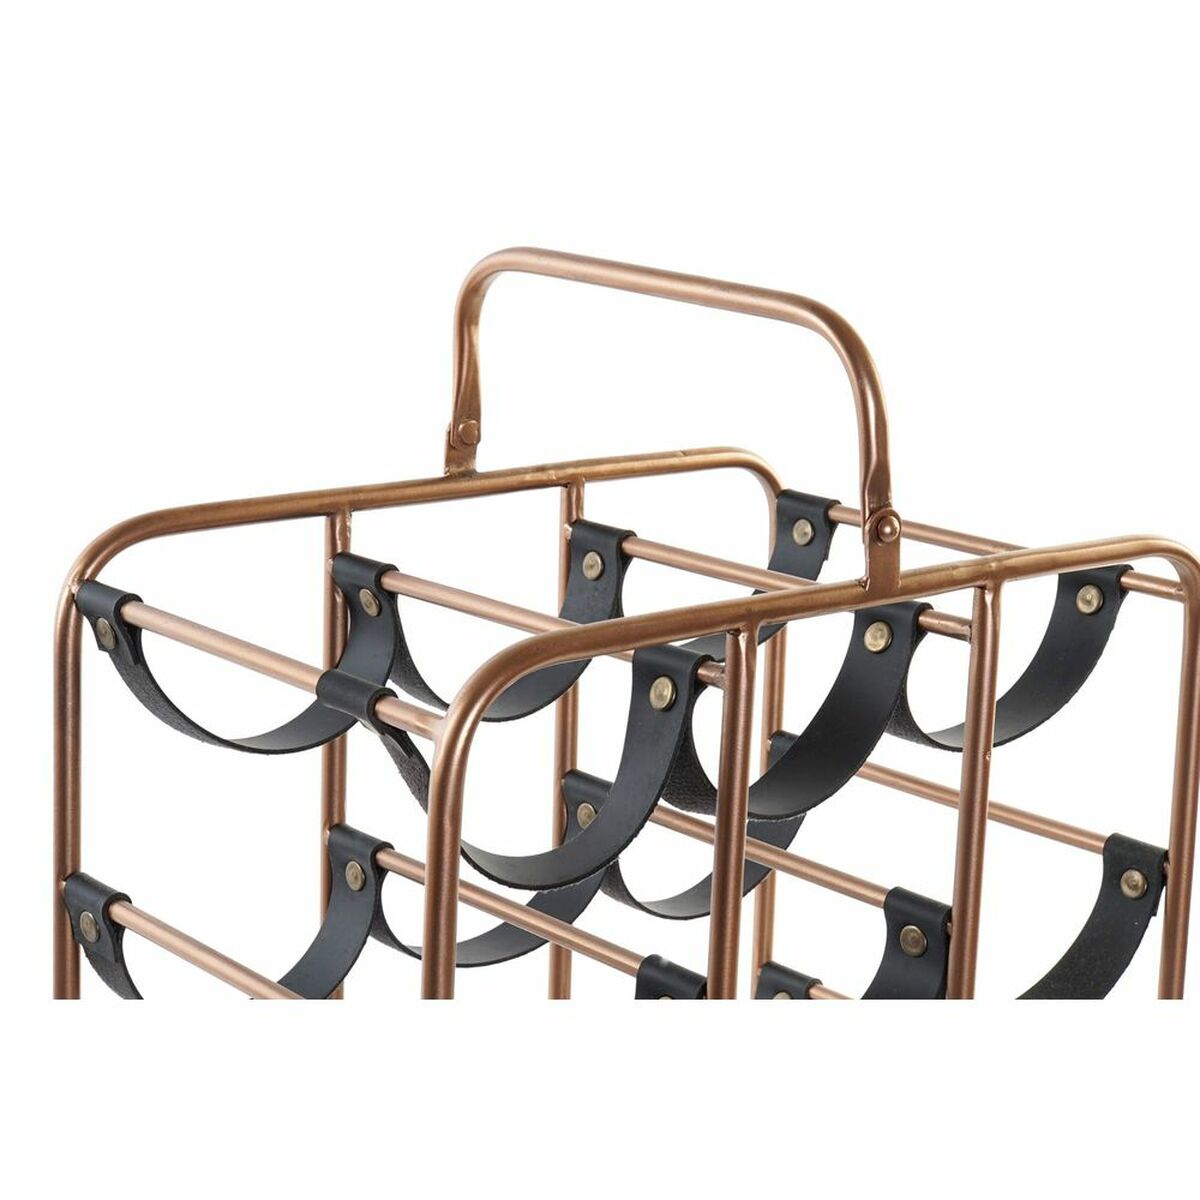 Bottle rack in Copper and Black (37 x 23,5 x 54 cm)